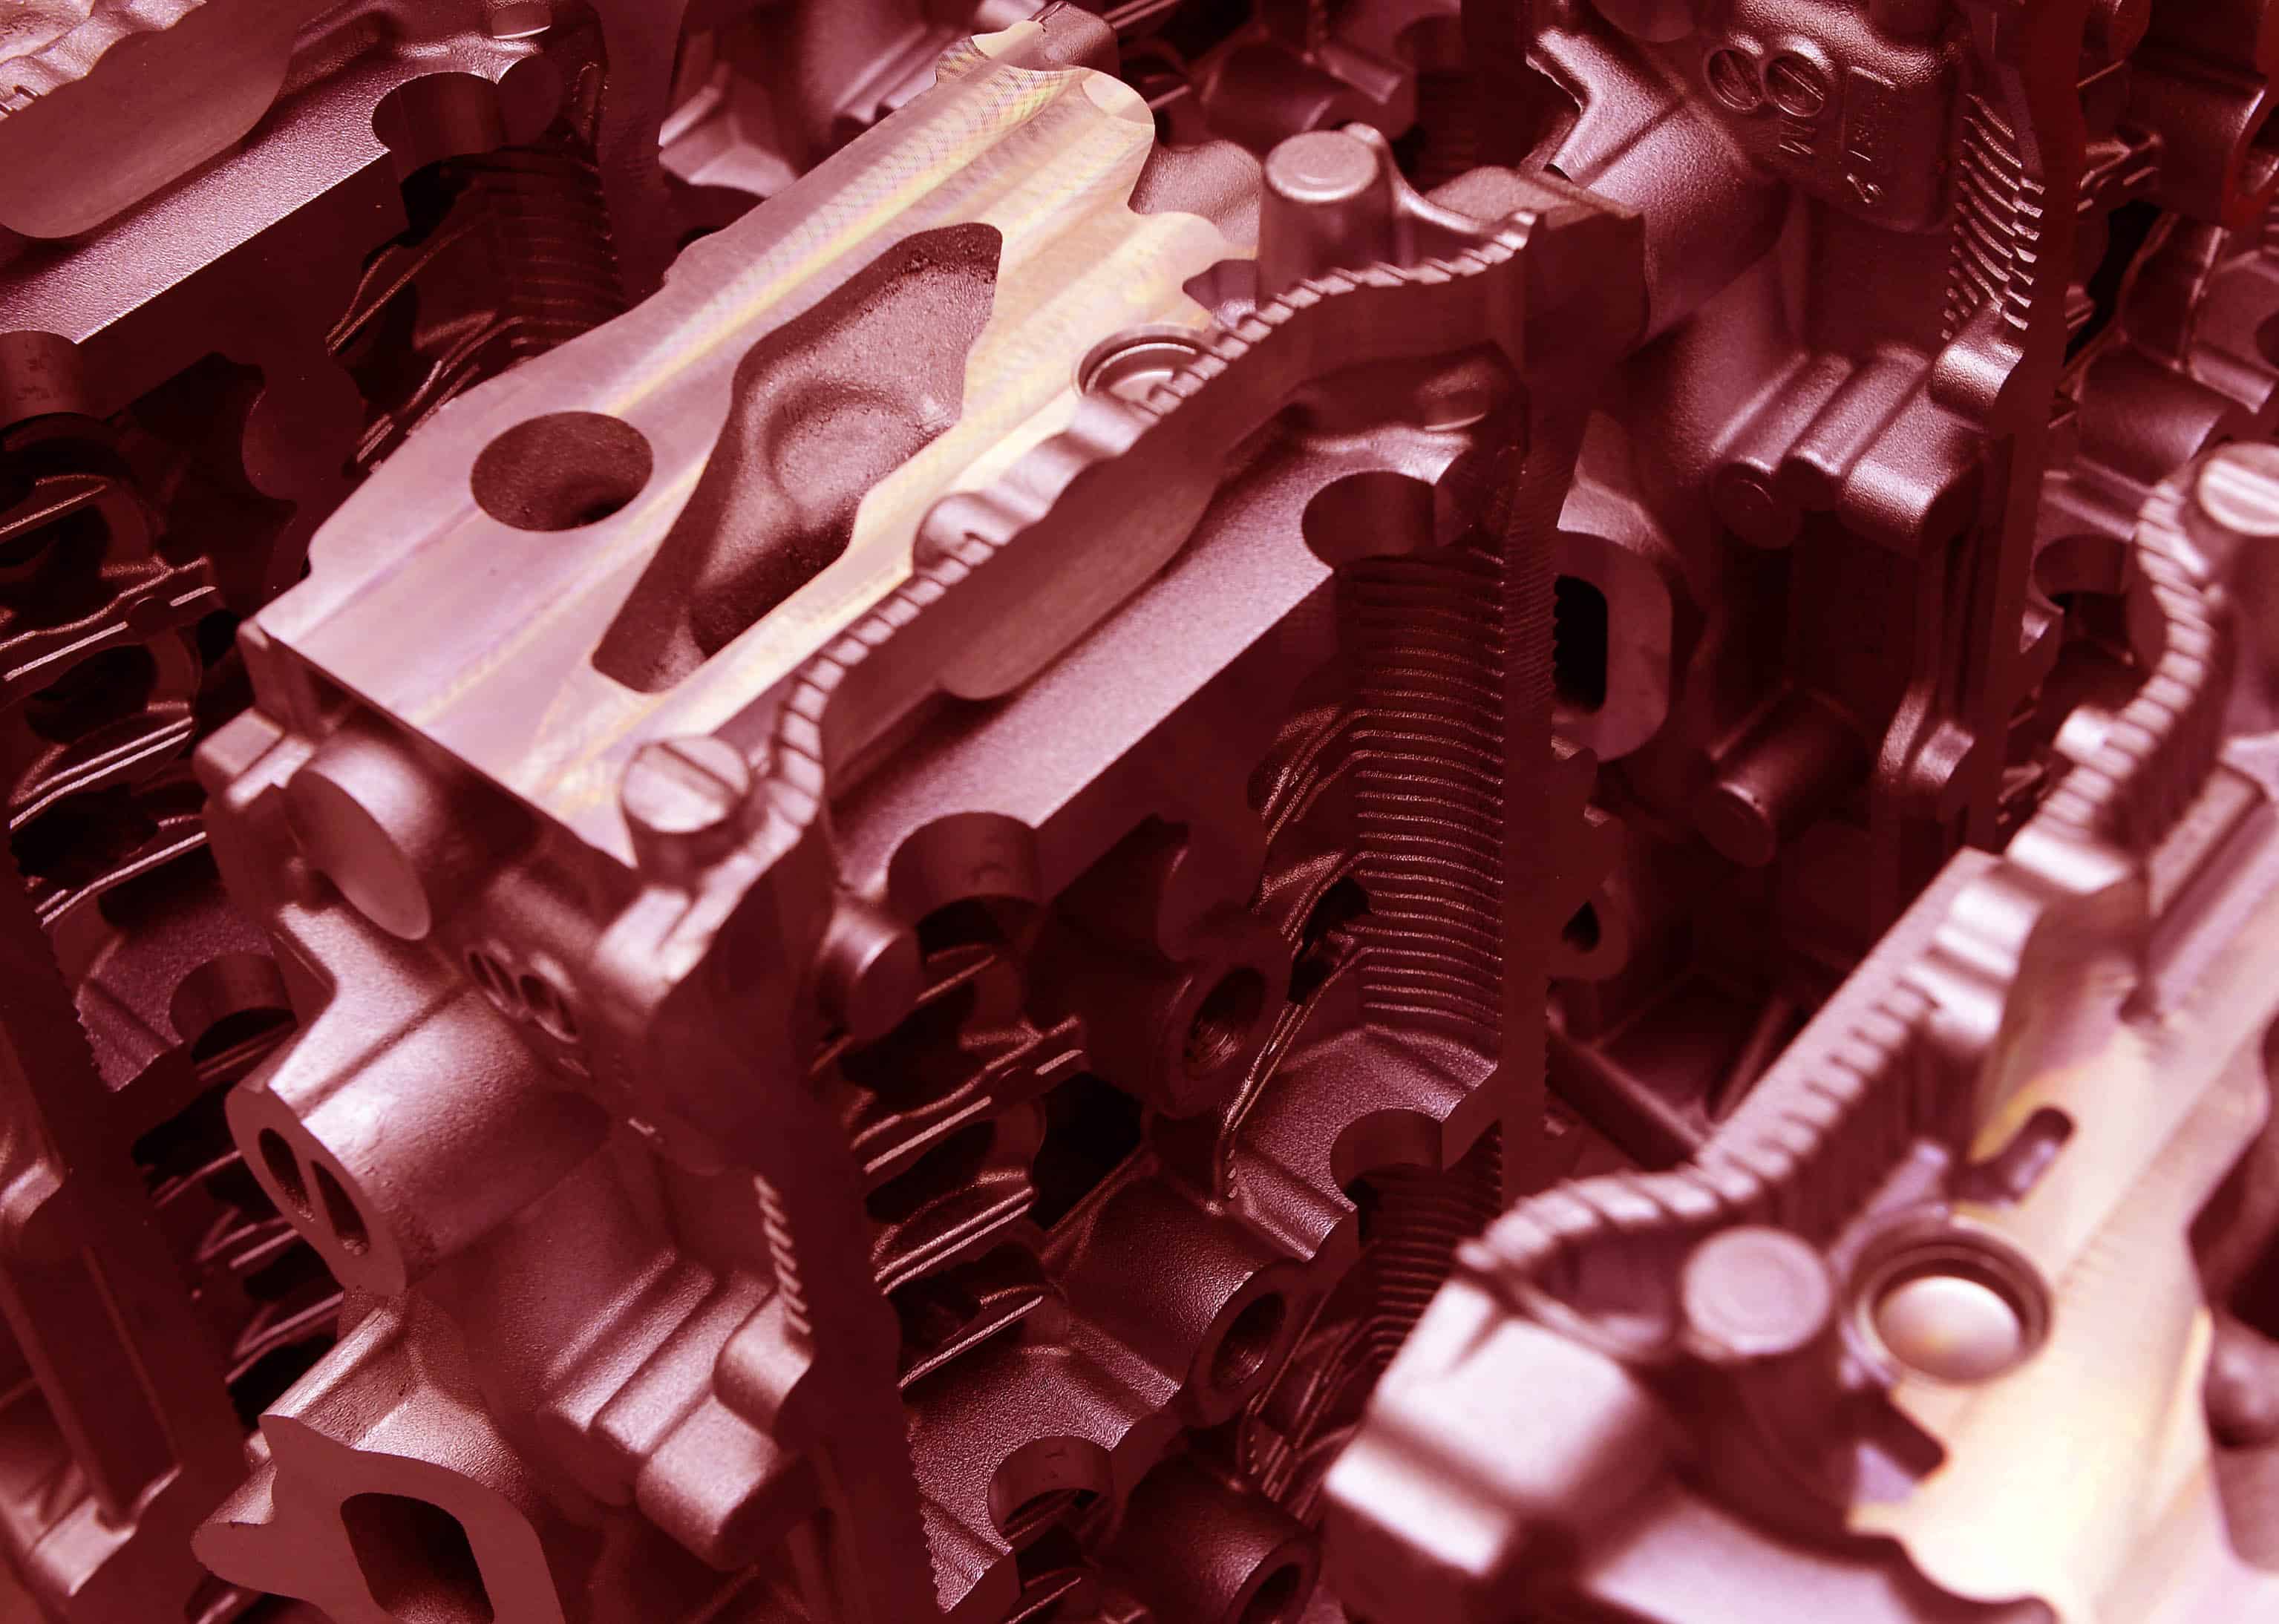 Grainger & Worrall casts engine blocks and cylinder heads for many high-performance marques